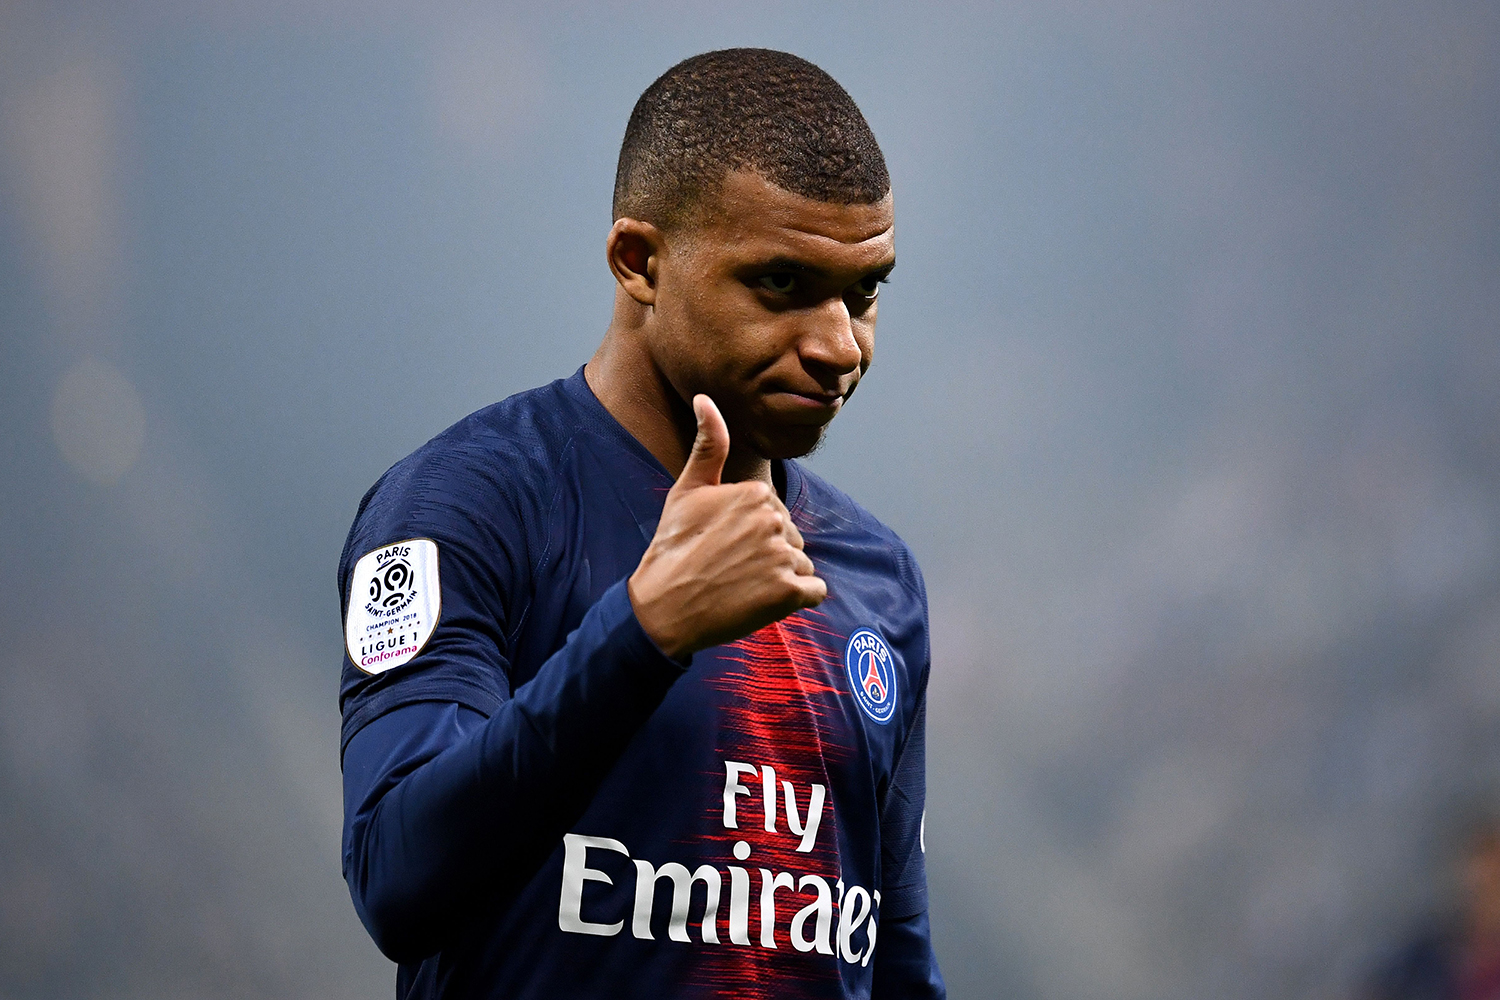 Mbappe thumbs up